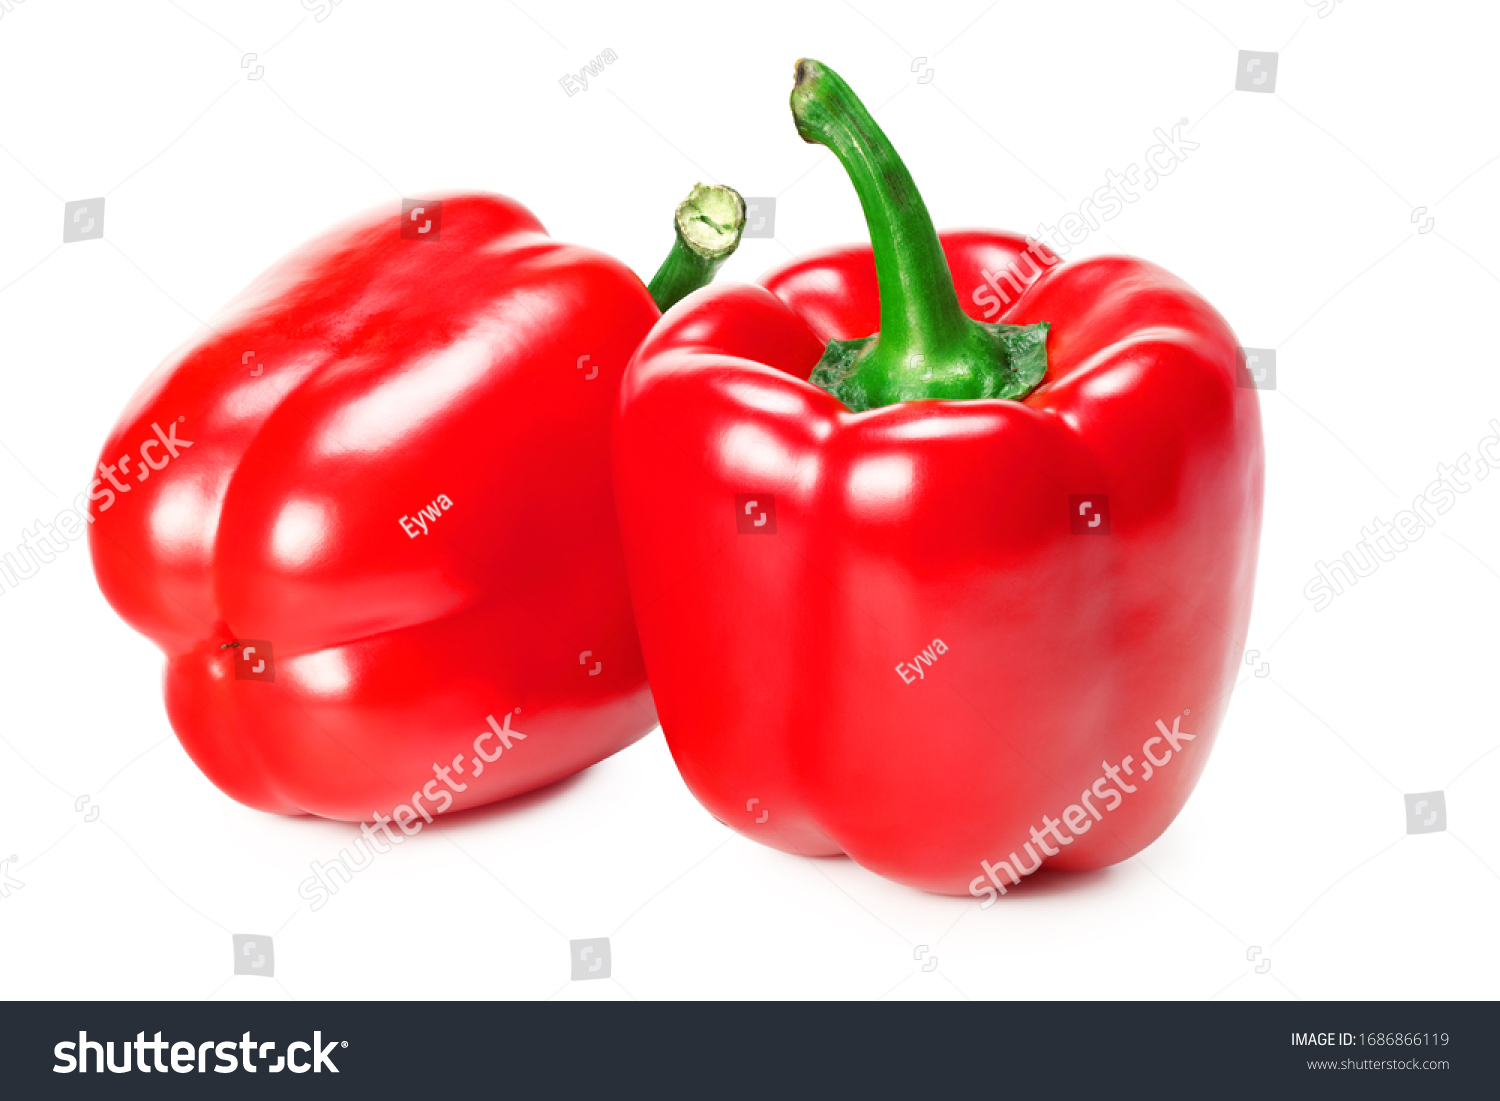 two red sweet bell peppers isolated on white background #1686866119